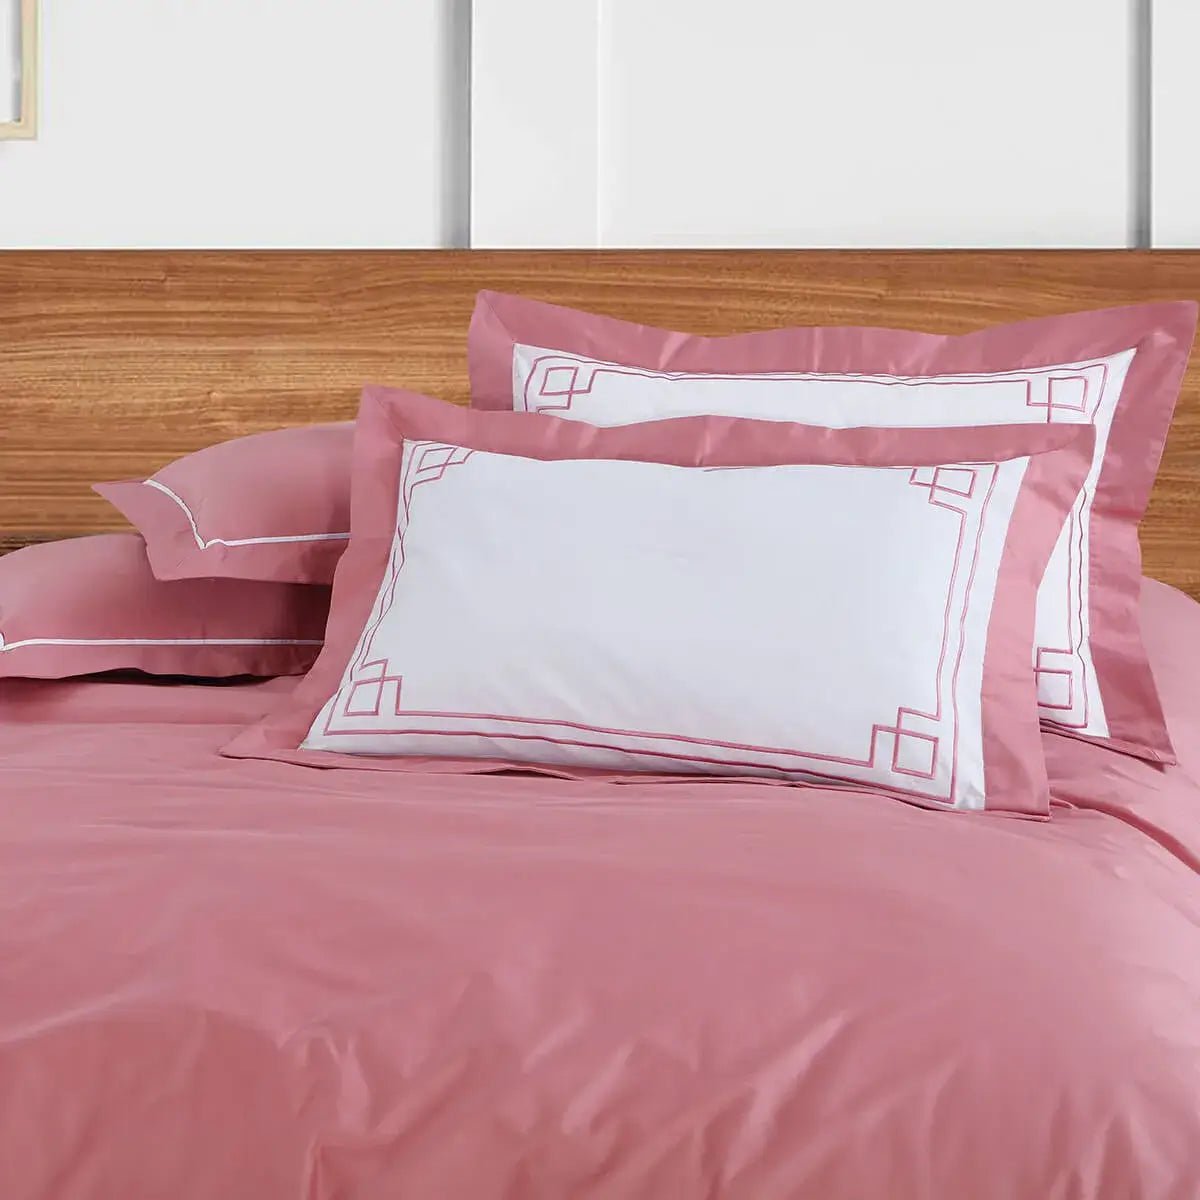 Malako Vivid Embroidered 500 TC King Size 100% Cotton Pintex Bedding - Rose  Pink / 1 Bedsheet + 2 Embroidered Pillow Covers + 2 Plain Pillow Covers